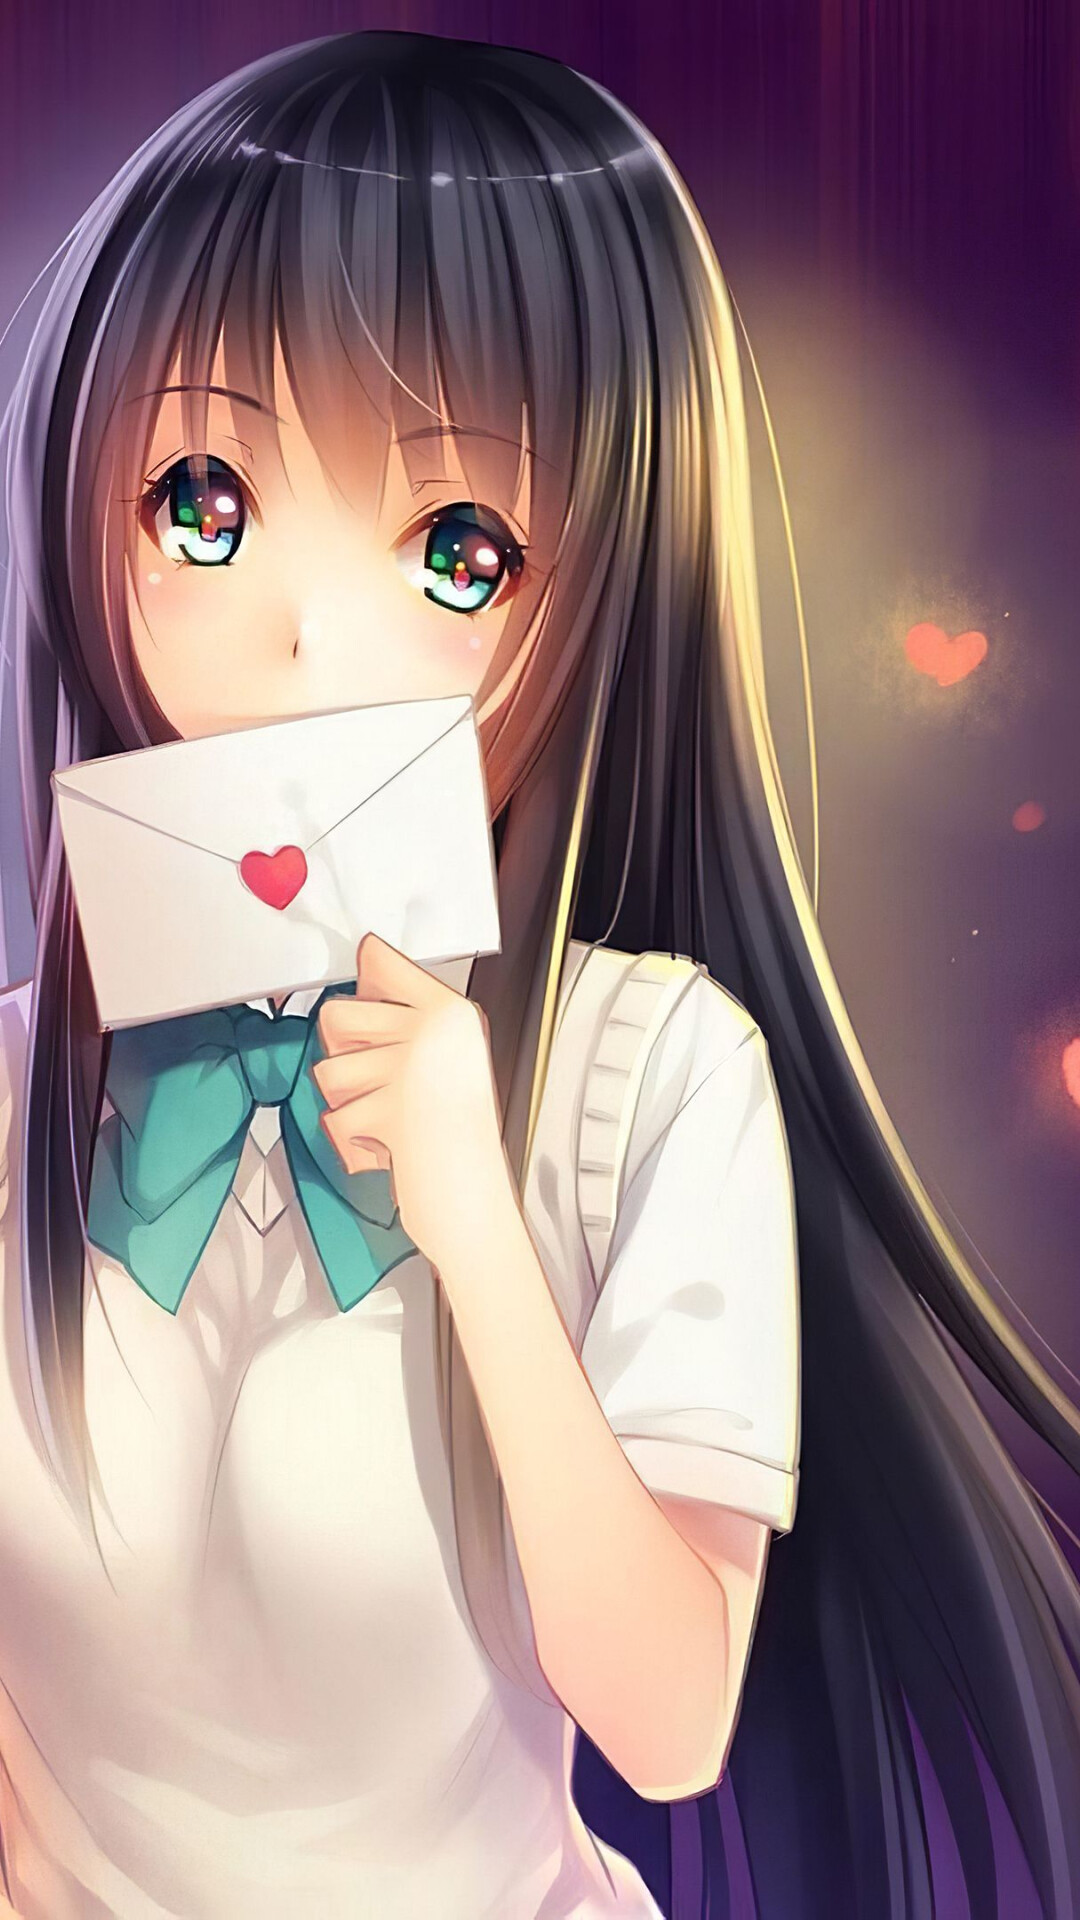 Girly: A female anime cartoon character, Valentine's Day envelope, Heart-shaped stamp. 1080x1920 Full HD Wallpaper.